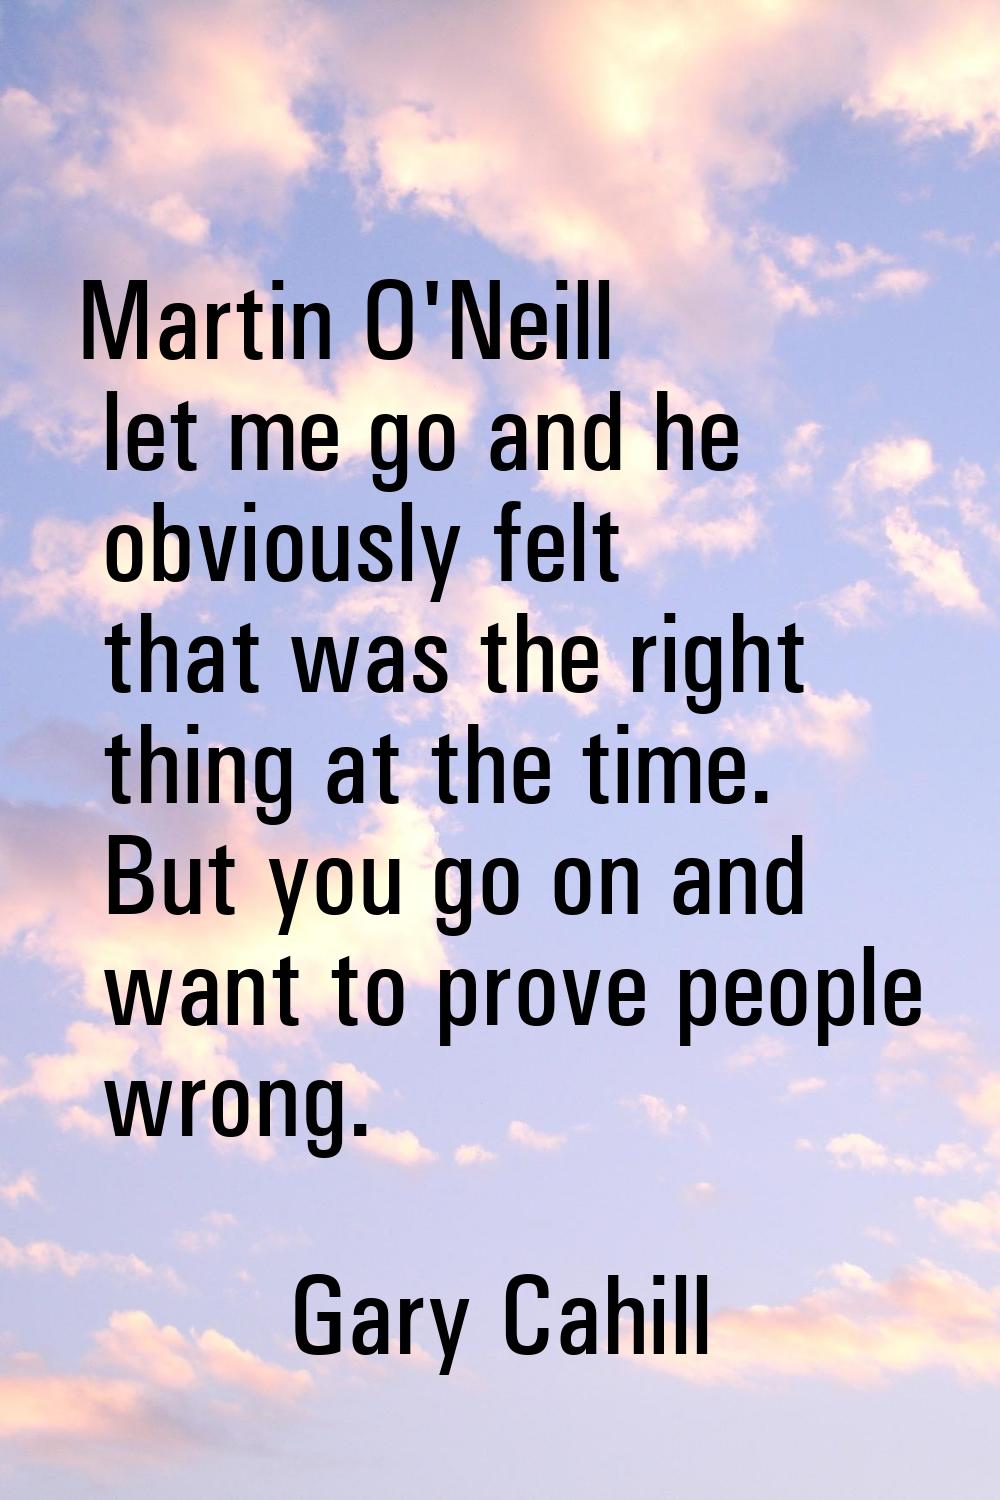 Martin O'Neill let me go and he obviously felt that was the right thing at the time. But you go on 